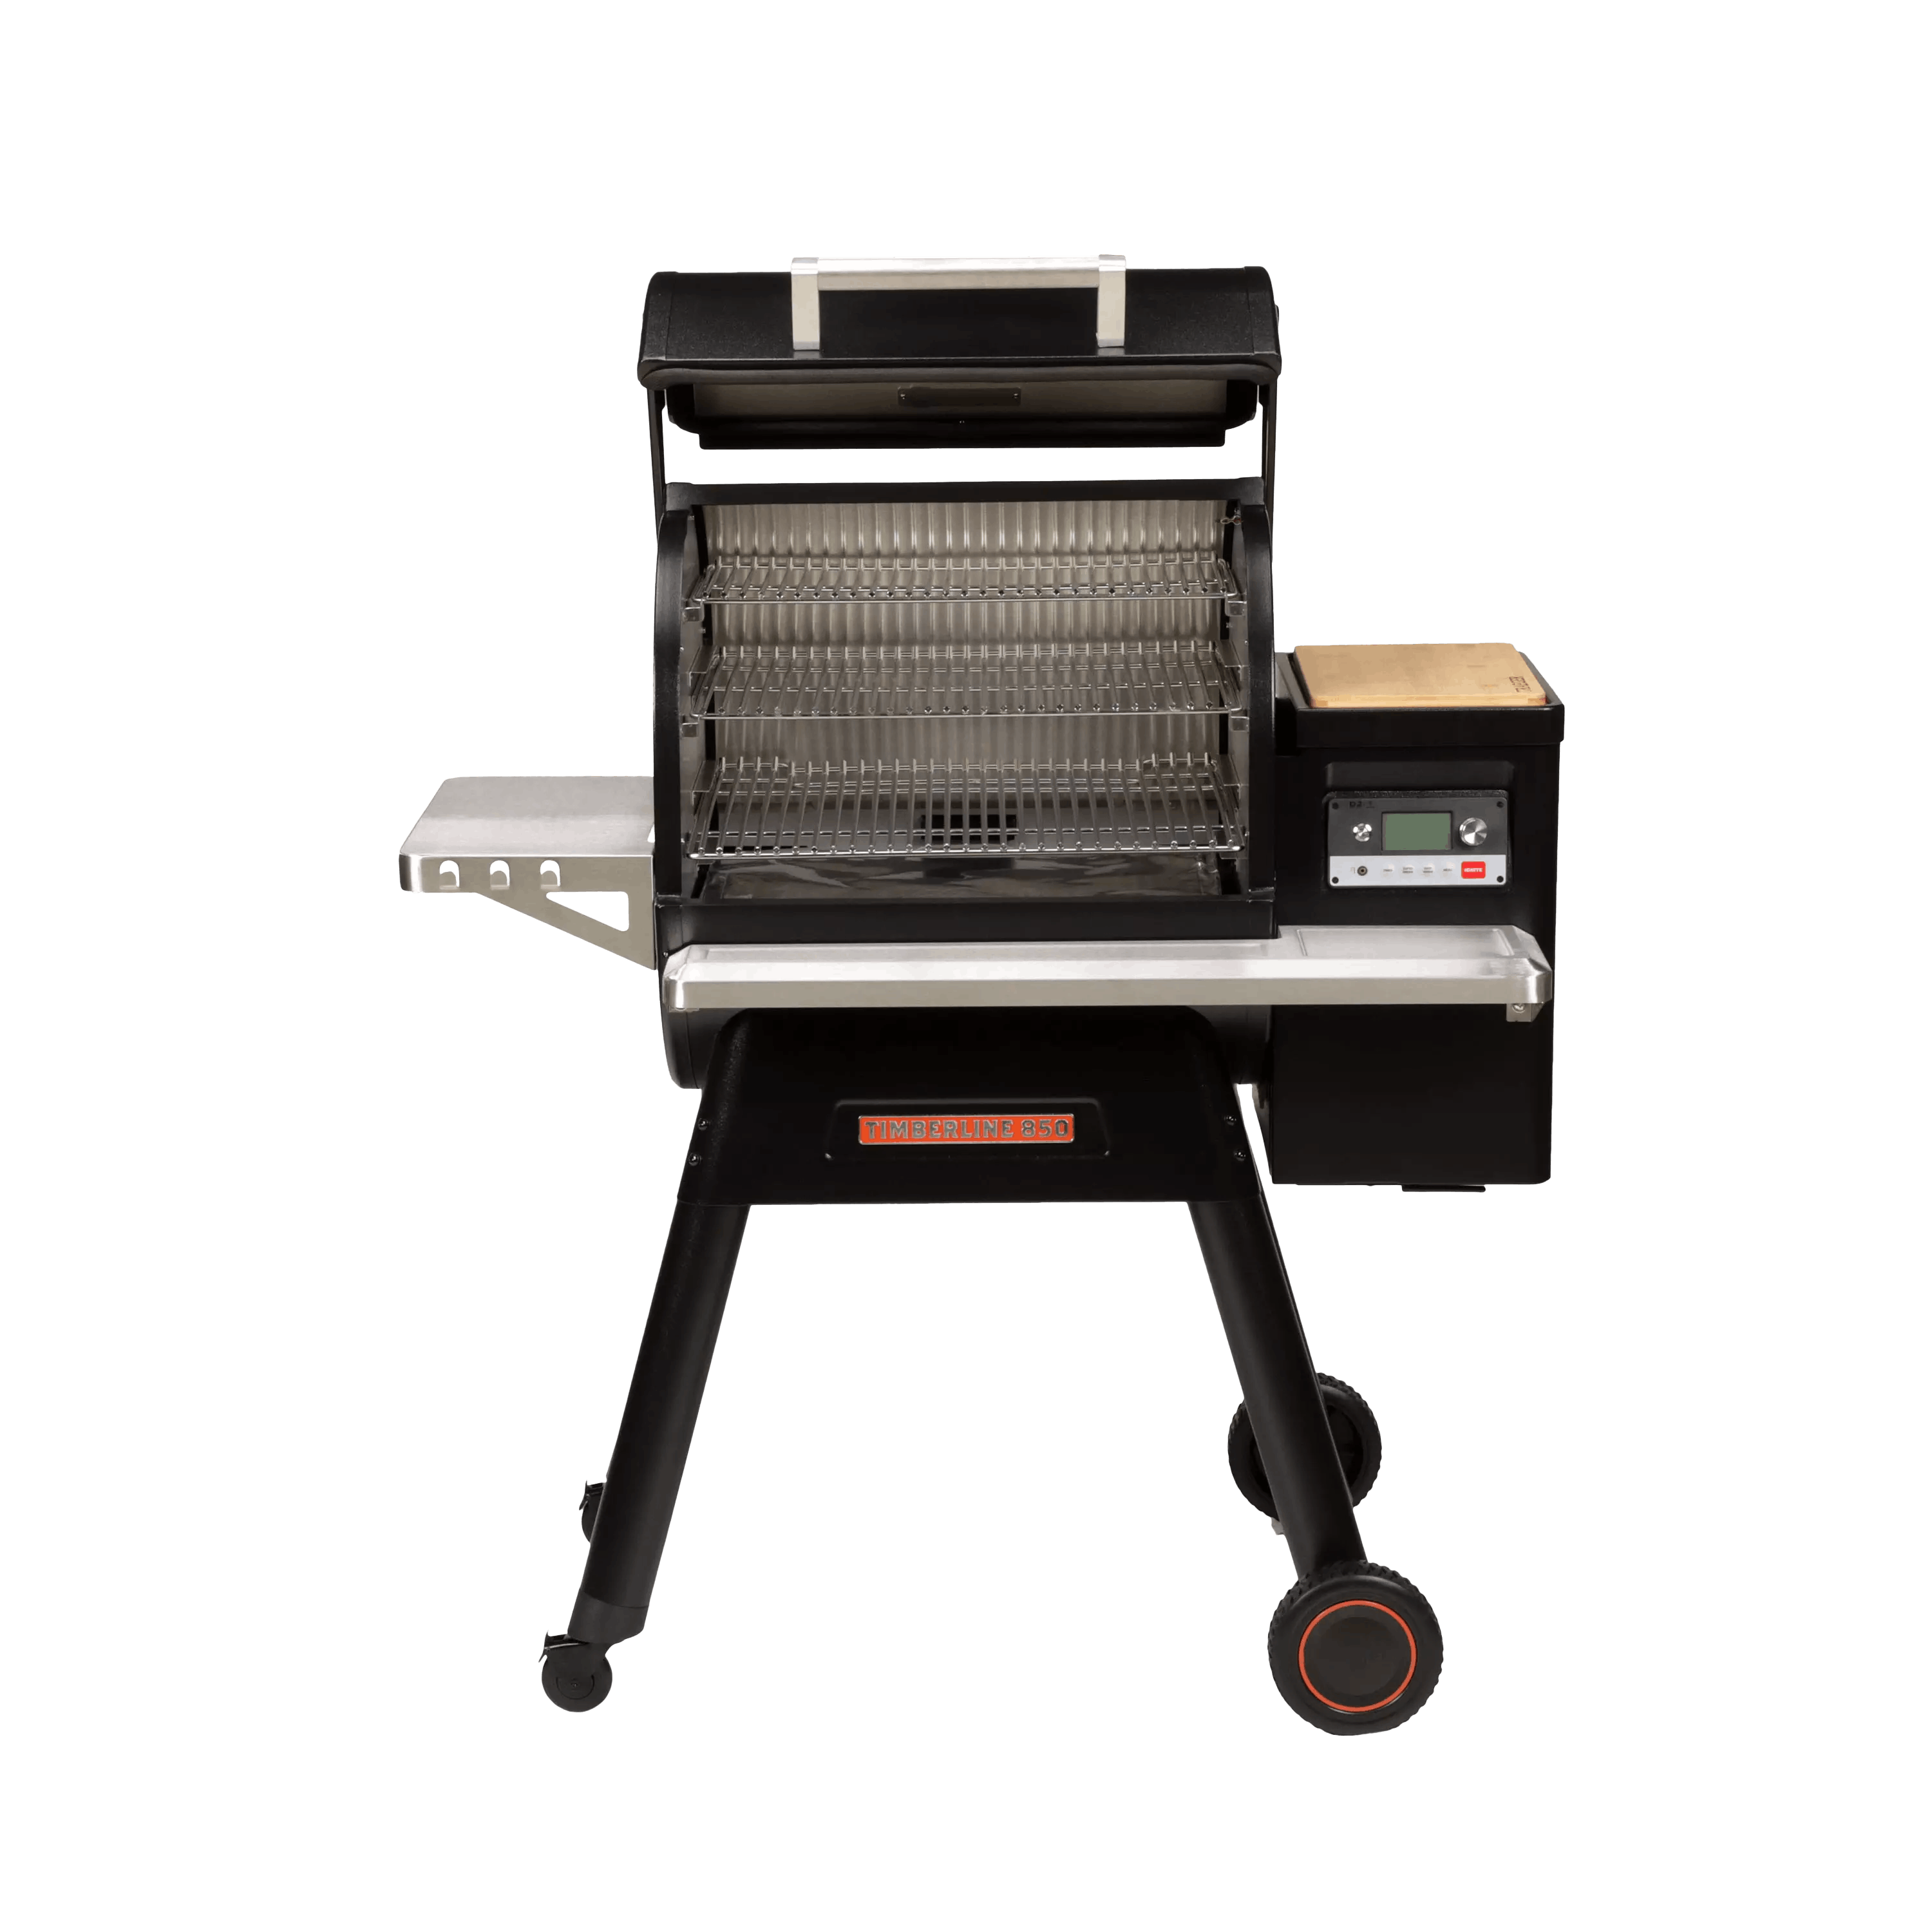 Traeger Timberline 850 Wi-Fi Controlled Wood Pellet Grill with WiFire · 46 in.